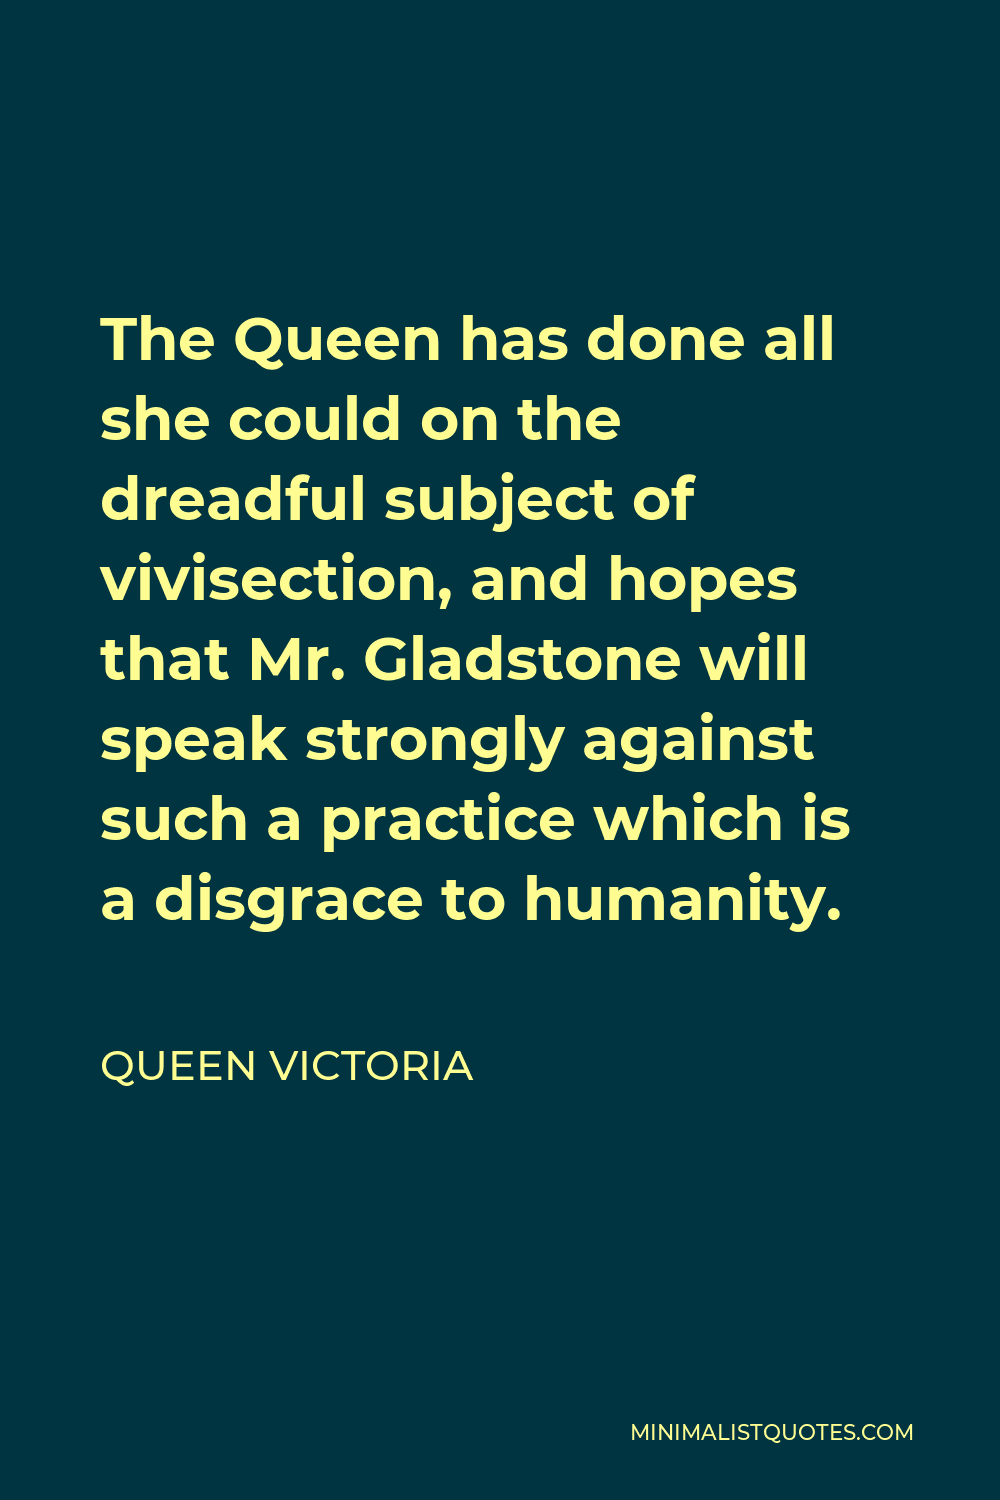 Queen Victoria Quote - The Queen has done all she could on the dreadful subject of vivisection, and hopes that Mr. Gladstone will speak strongly against such a practice which is a disgrace to humanity.